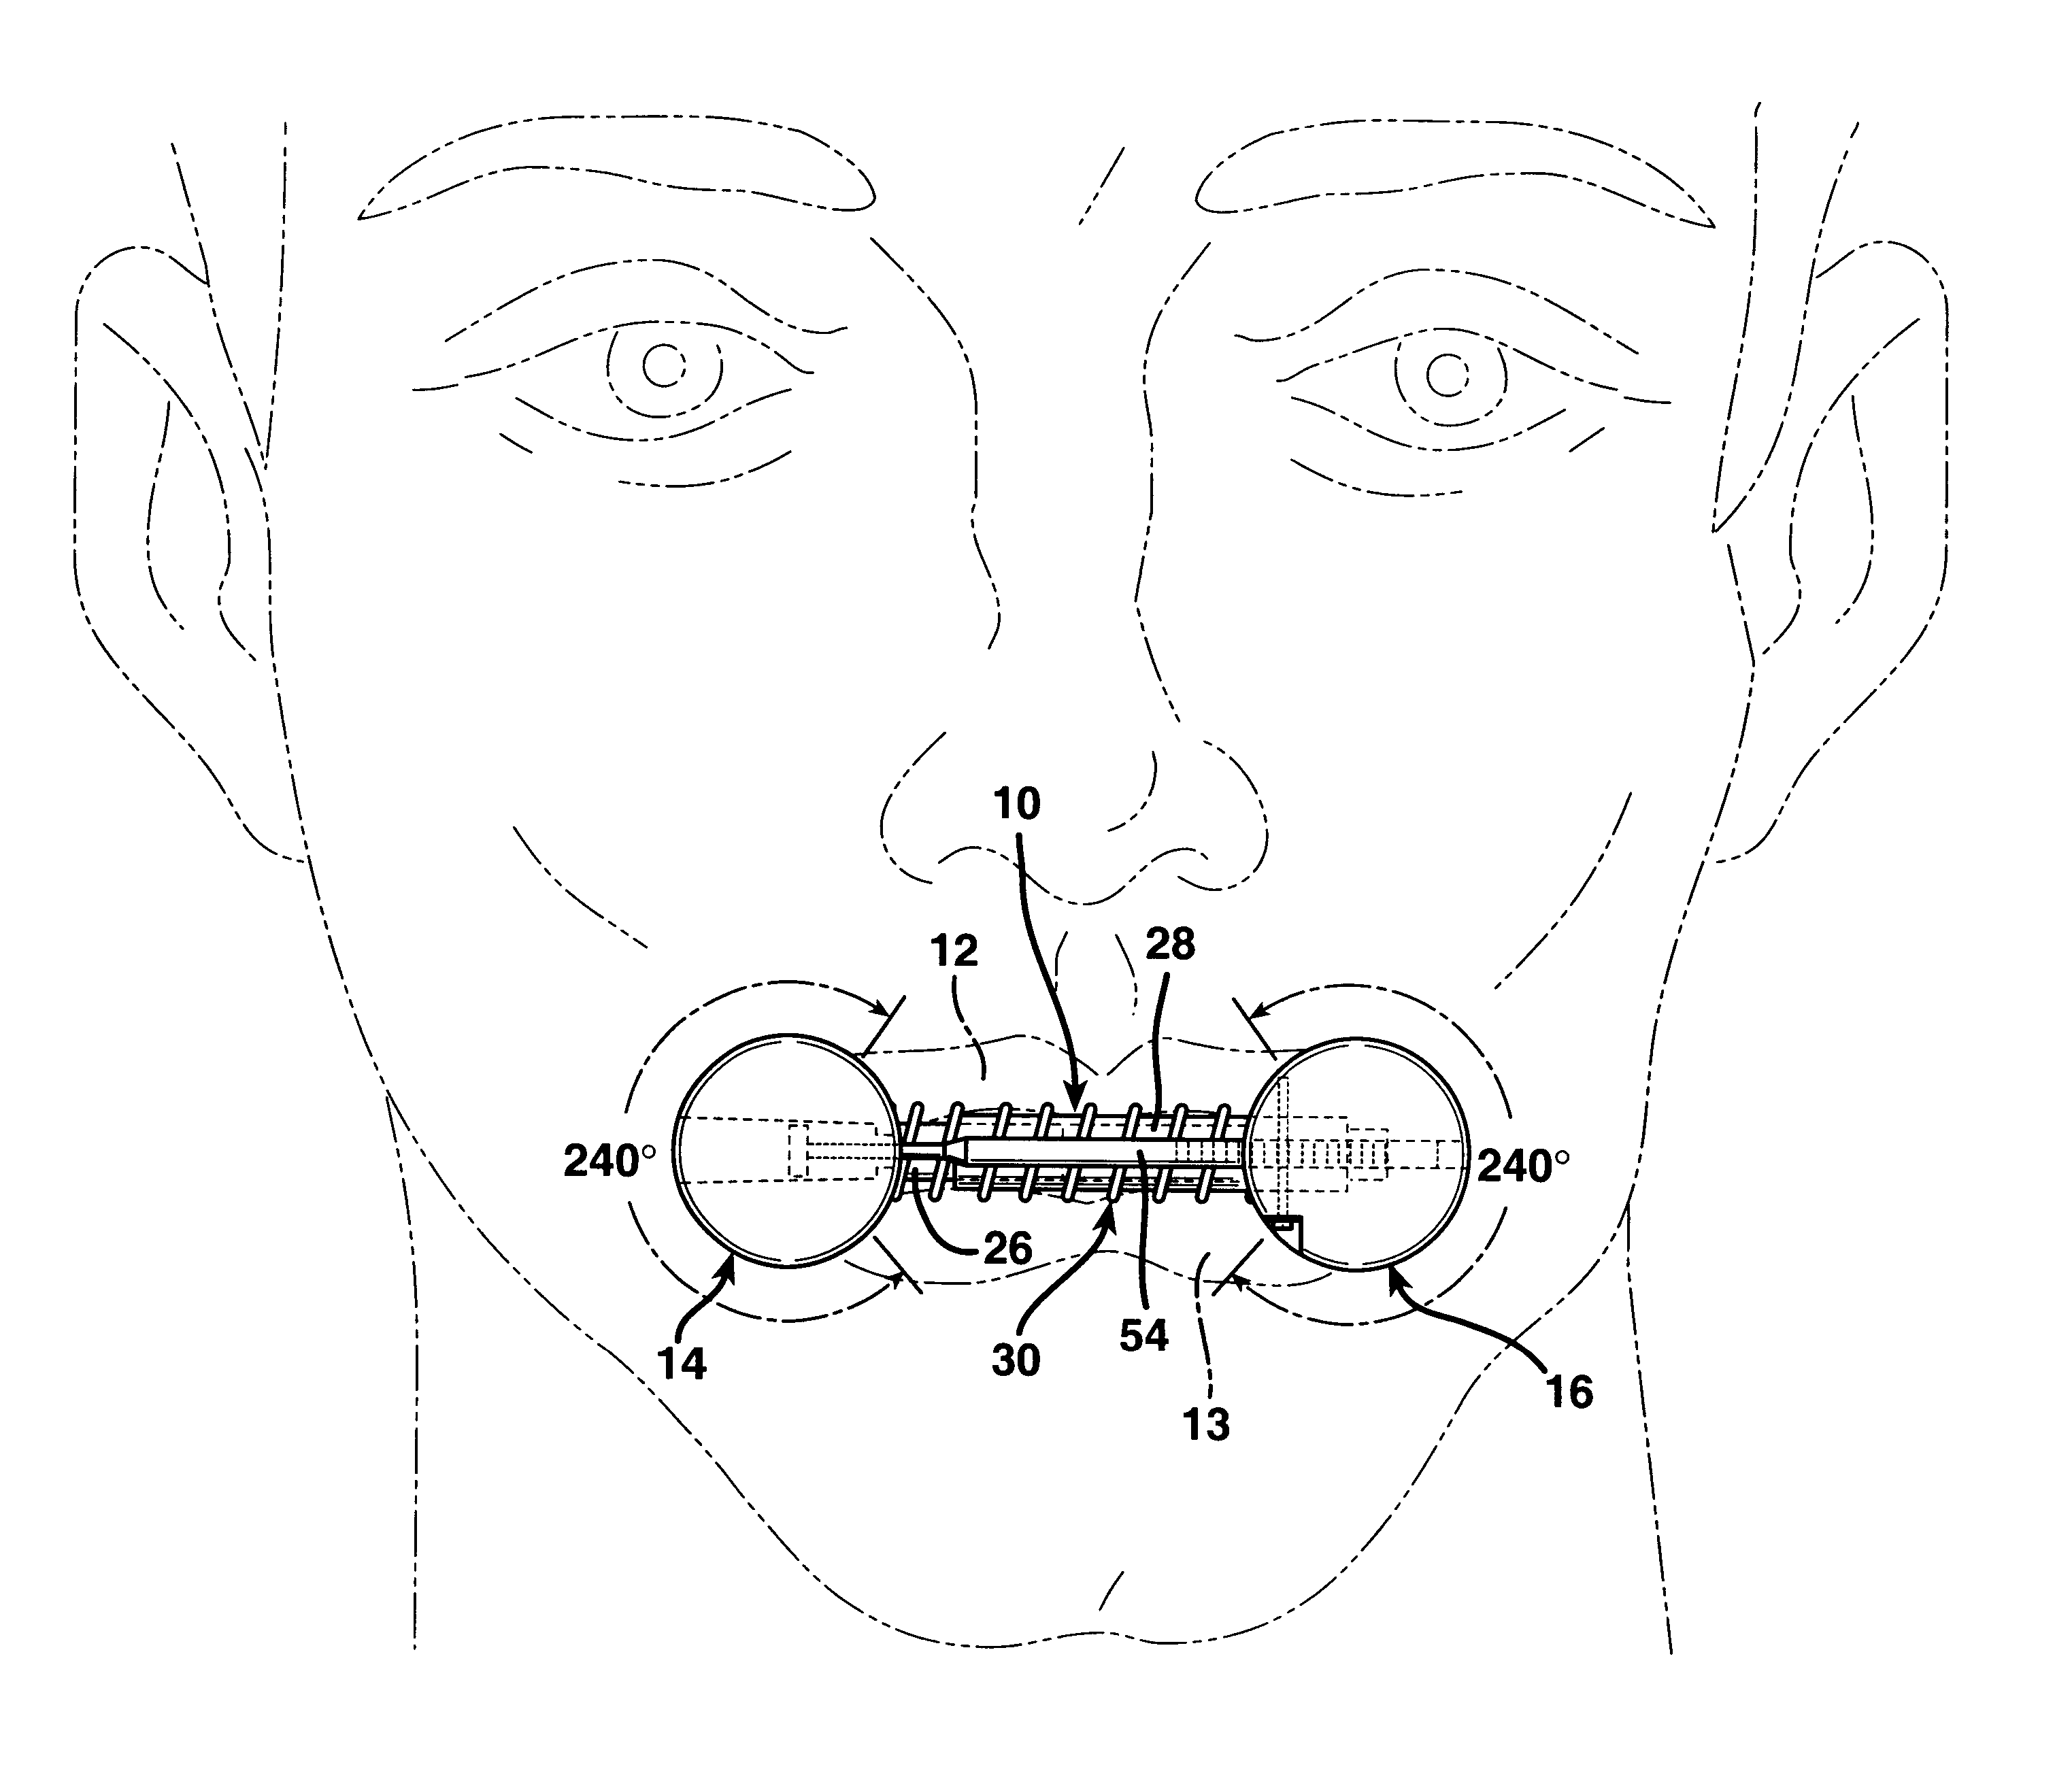 Facial muscle exercising device